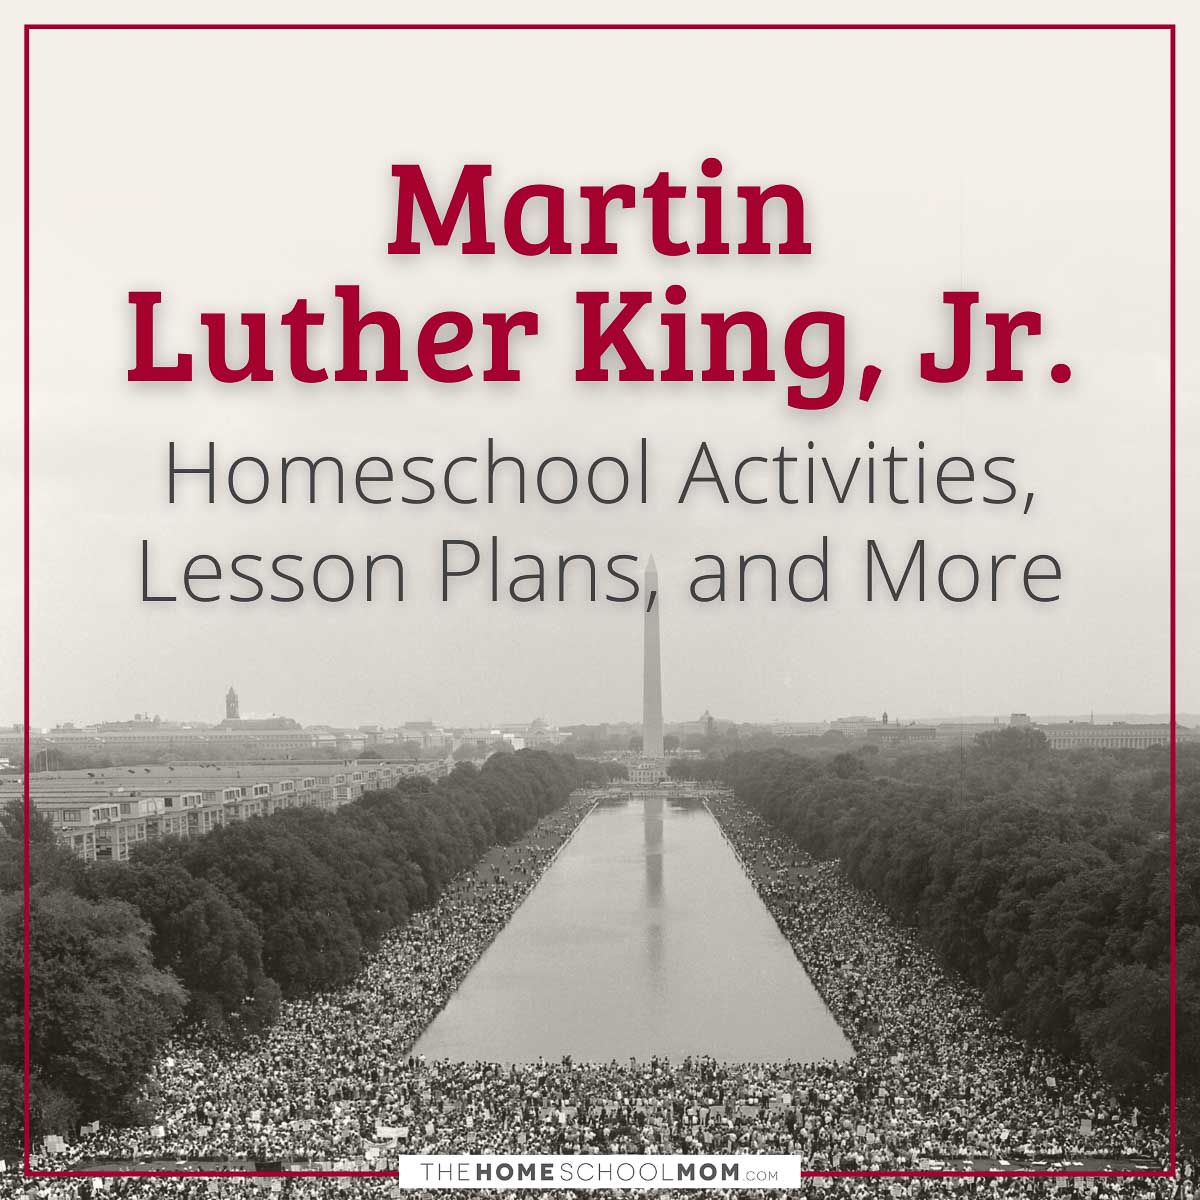 Martin Luther King, Jr. Homeschool Activities, Lesson Plans, and More